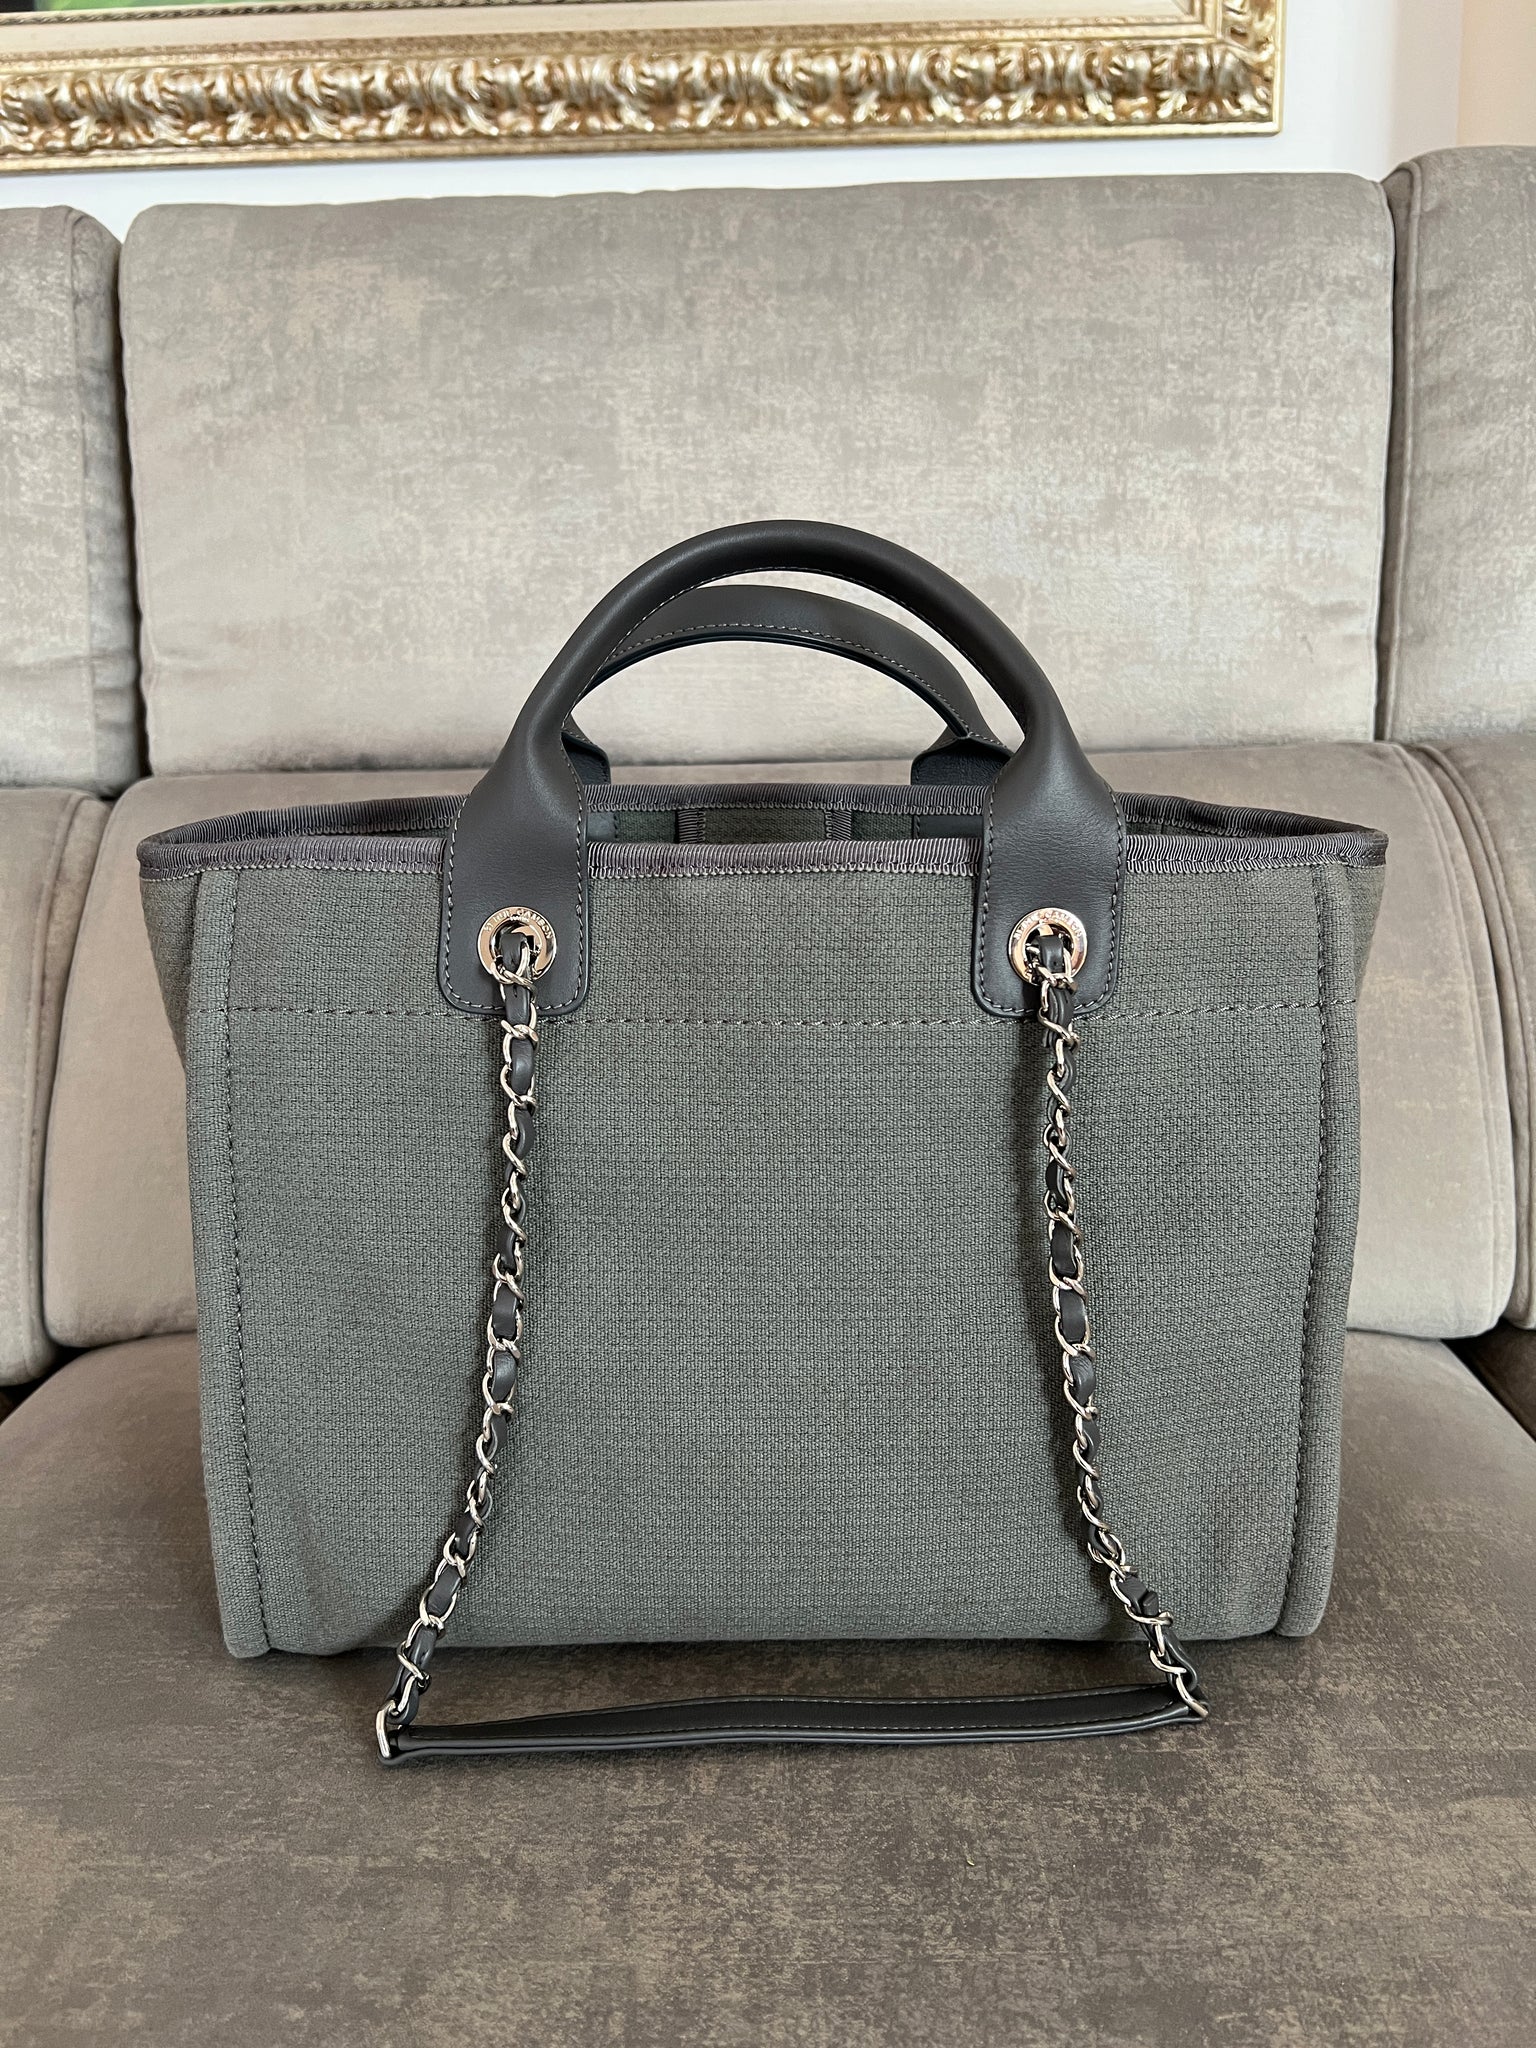 Chanel Grey Canvas Large Deauville Tote in Gray